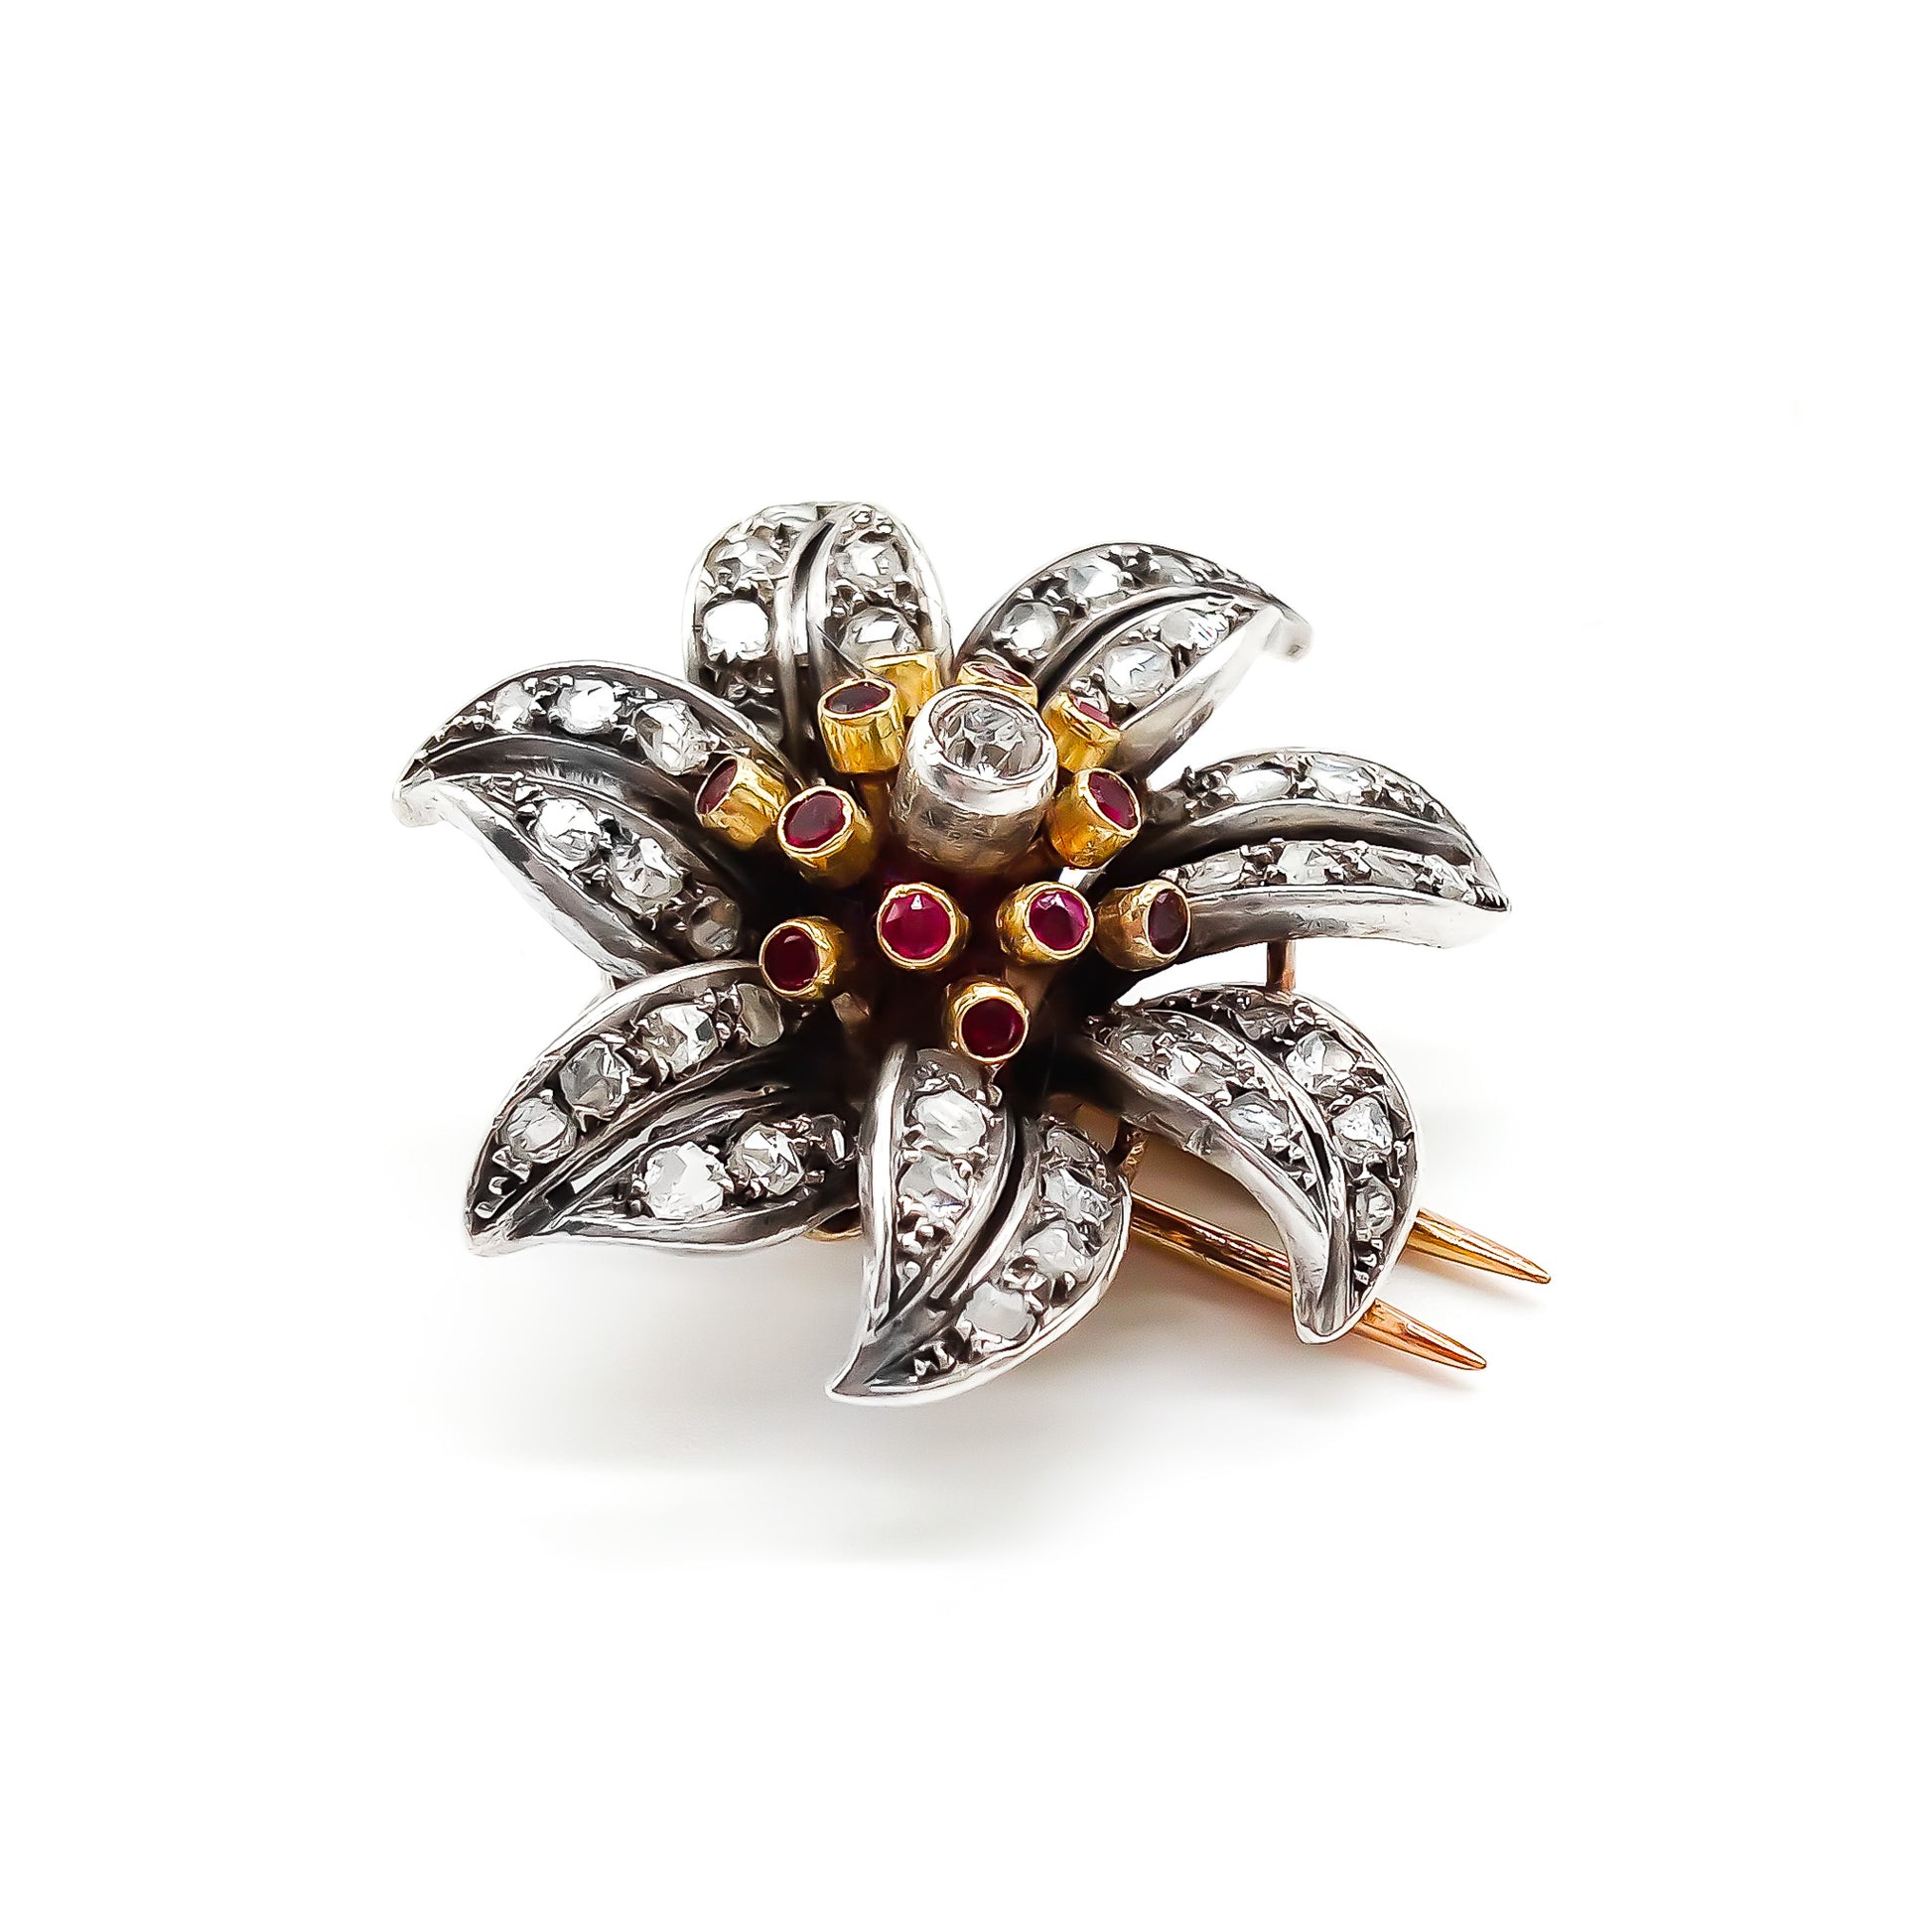 Magnificent 18ct rose gold and silver flower clip brooch with old cut, pavé set diamonds, rubies and a centre old cut diamond in a tube setting. Circa 1900